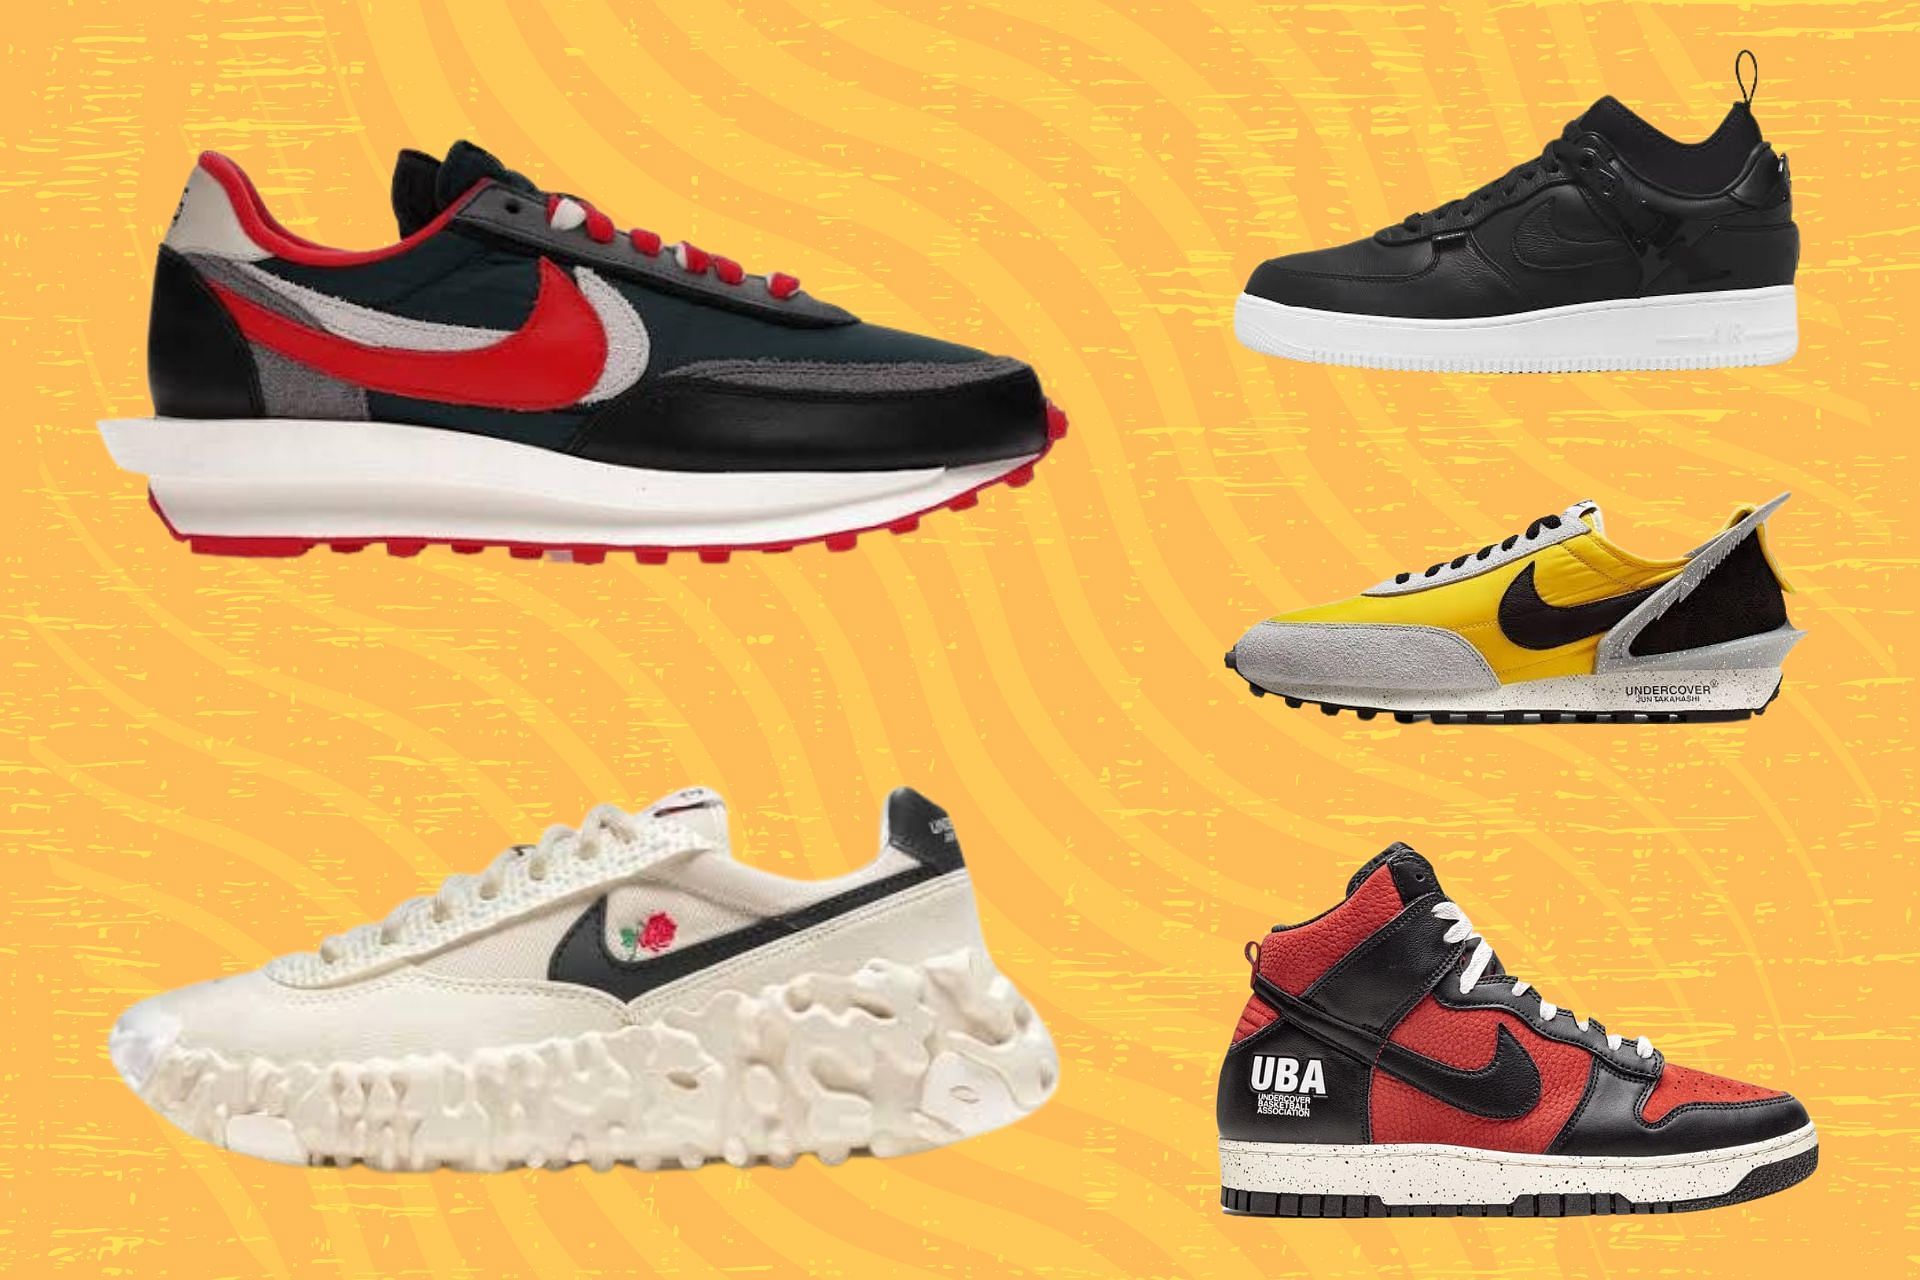 Five best Nike x Undercover sneaker collabs of all time